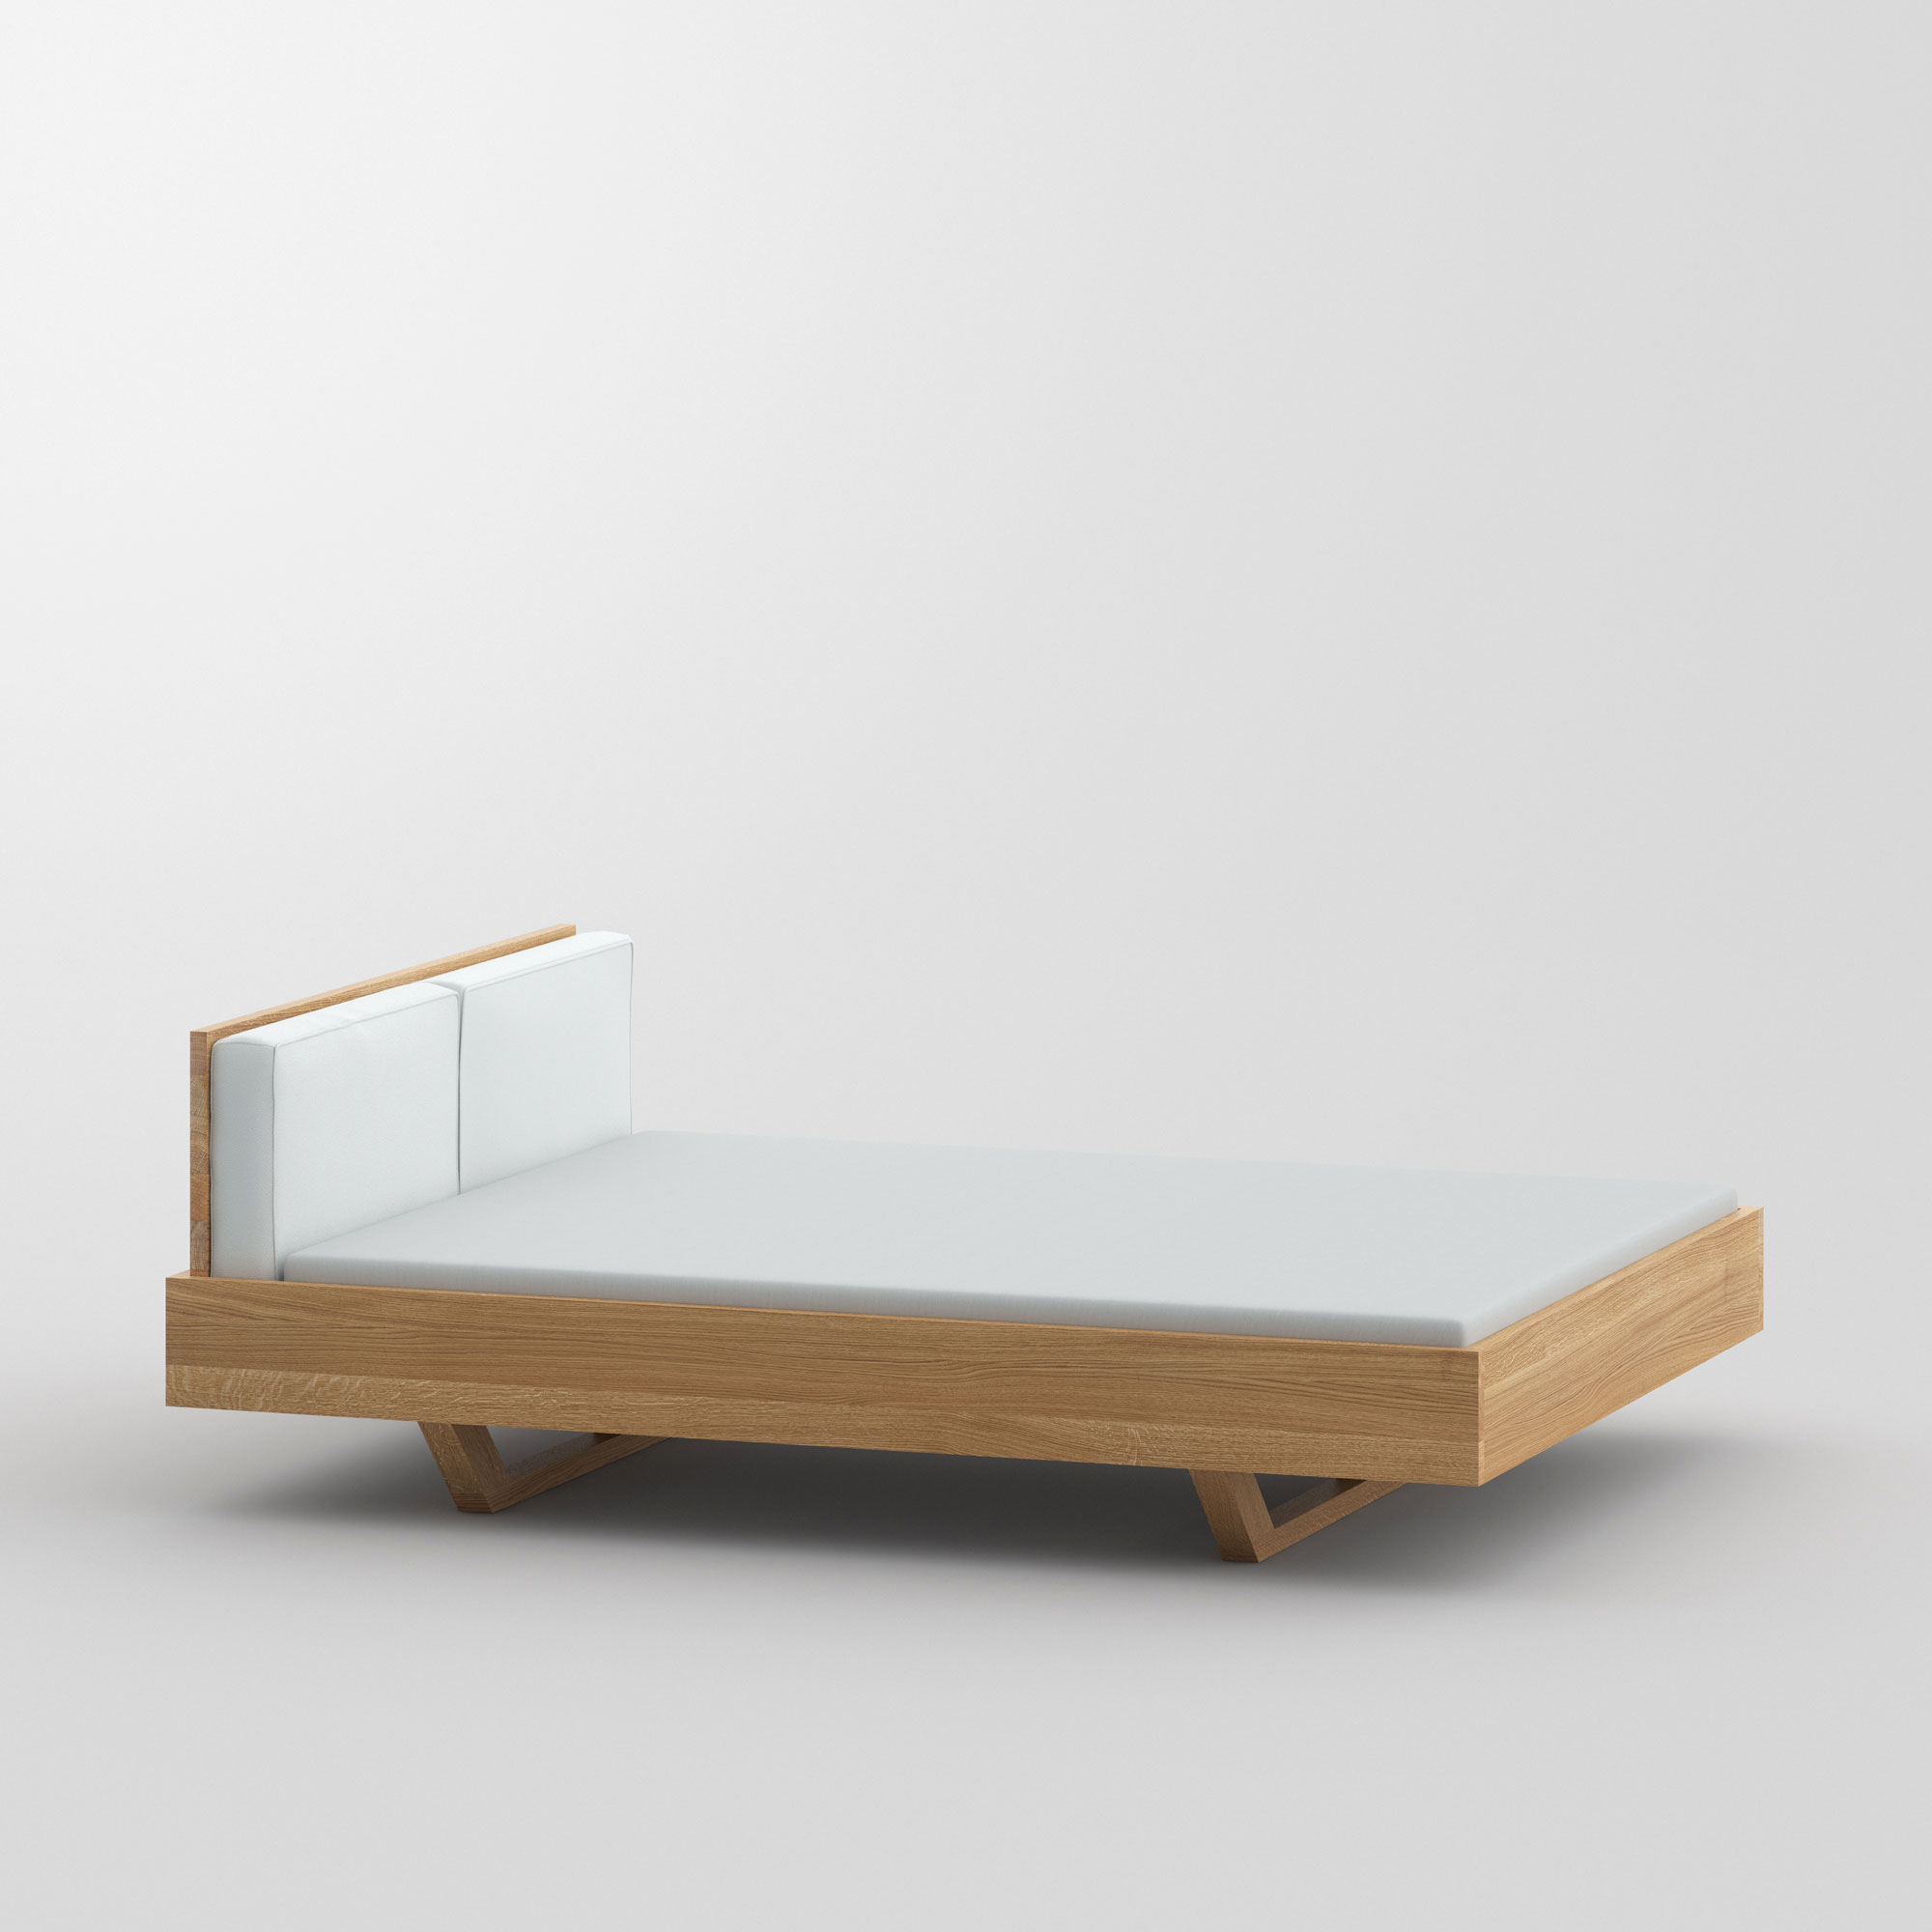 Wood Bed MEA cam1 custom made in solid wood by vitamin design